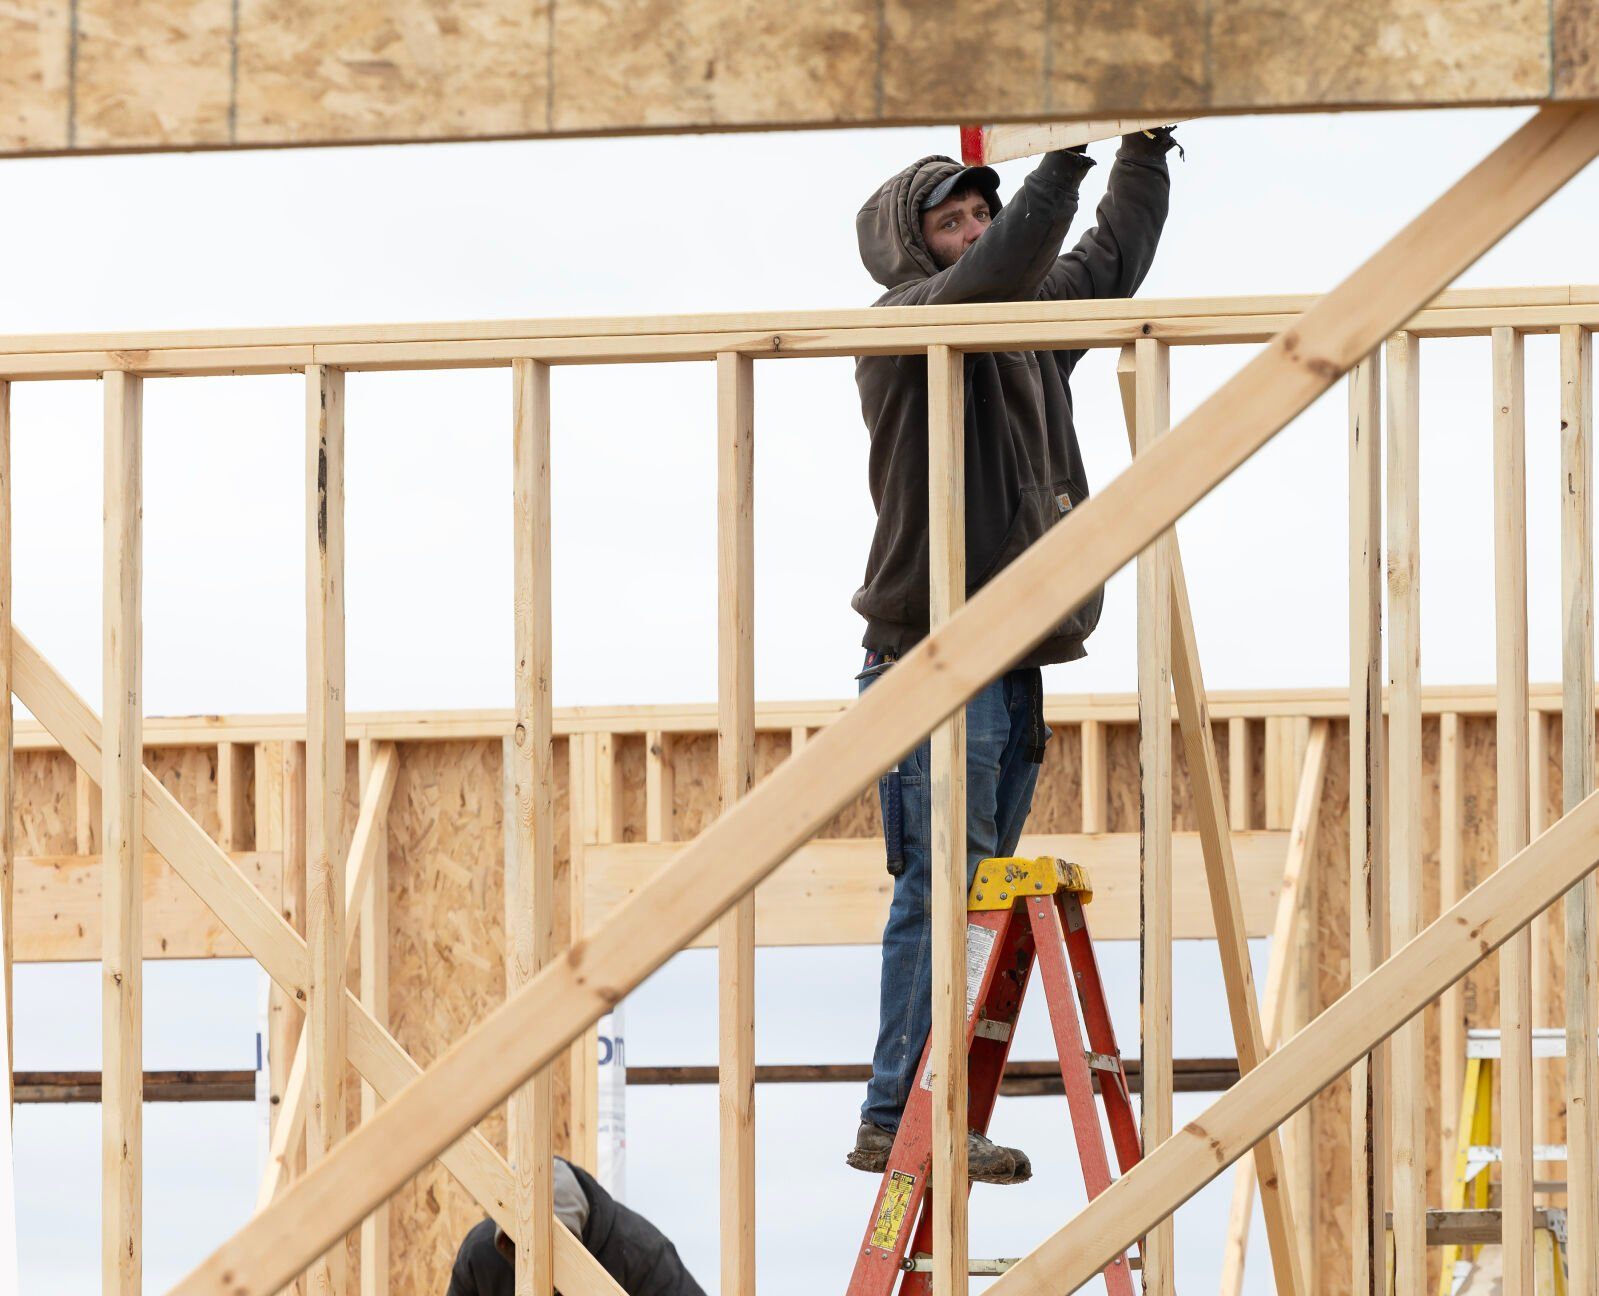 Nate Lange, with Carpenters Construction Services Inc., sets a roof joist into place at a project in Kieler, Wis.    PHOTO CREDIT: Stephen Gassman
Telegraph Herald